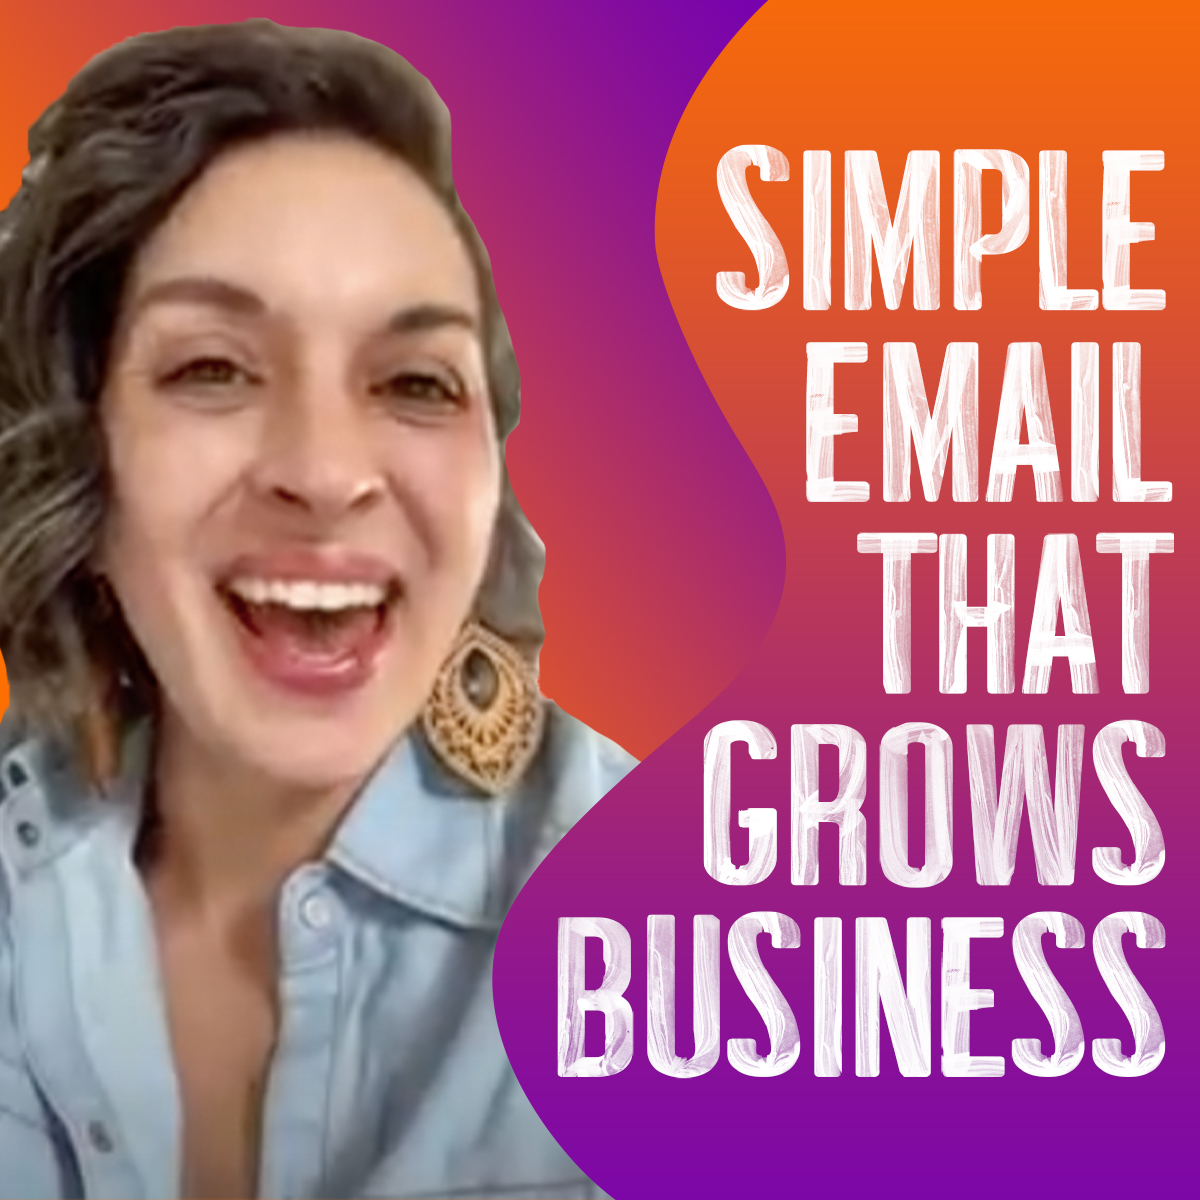 Simple Email That Grows Business